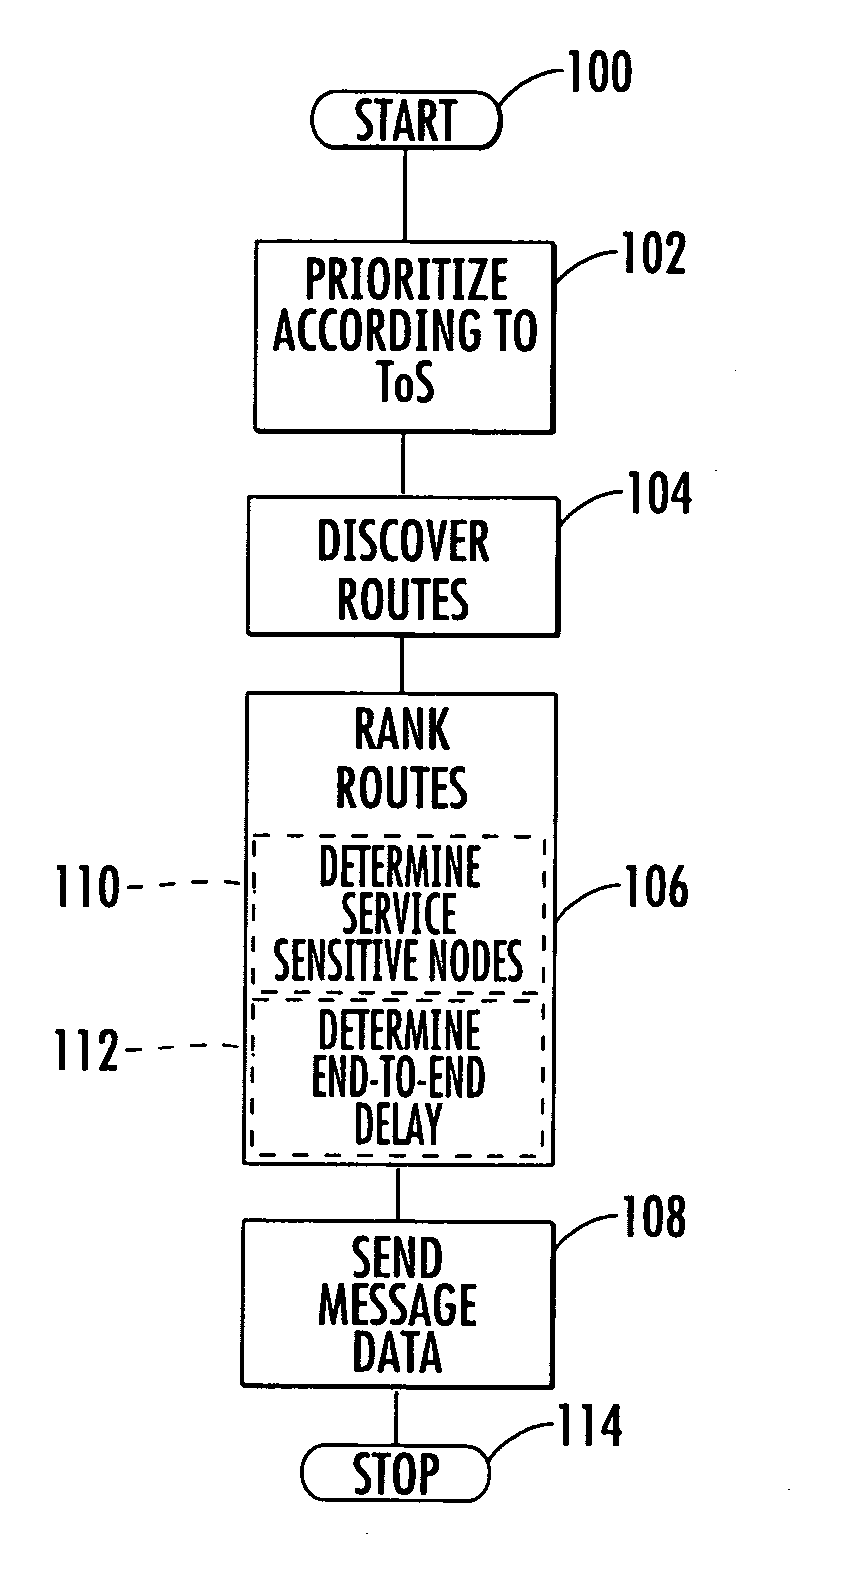 Load leveling in mobile ad-hoc networks to support end-to-end delay reduction, QoS and energy leveling